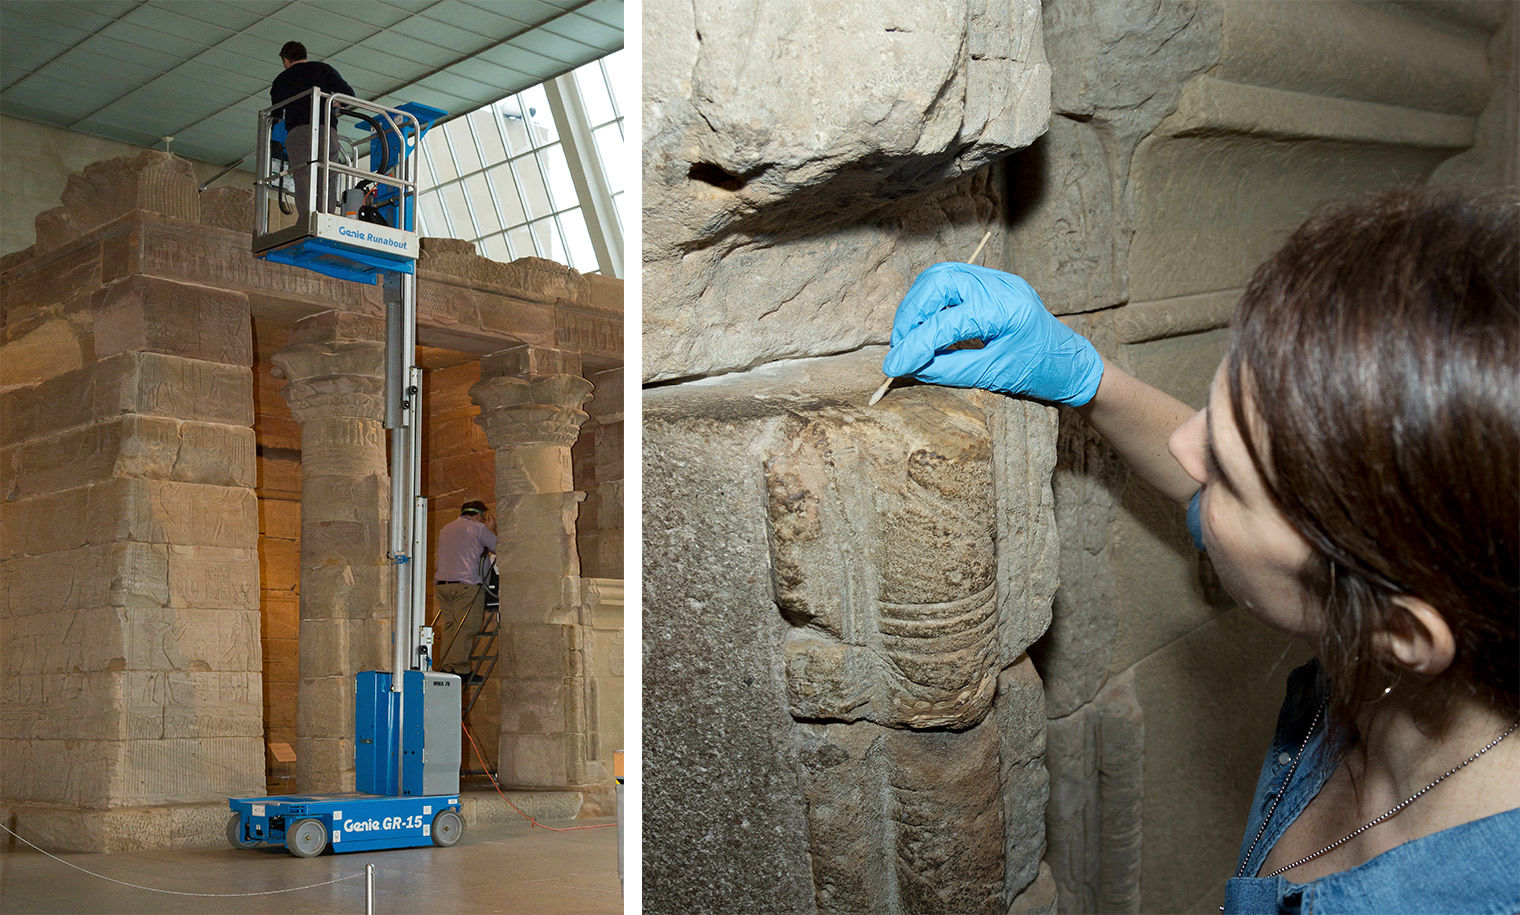 A composite image. On the left, a man is elevated on a lift outside the temple and another is on a ladder inside the temple. They are using soft brushes and low power vacuums. On the right, a woman with dark hair and blue plastic gloves is cleaning grime from small crevices in the temple walls.